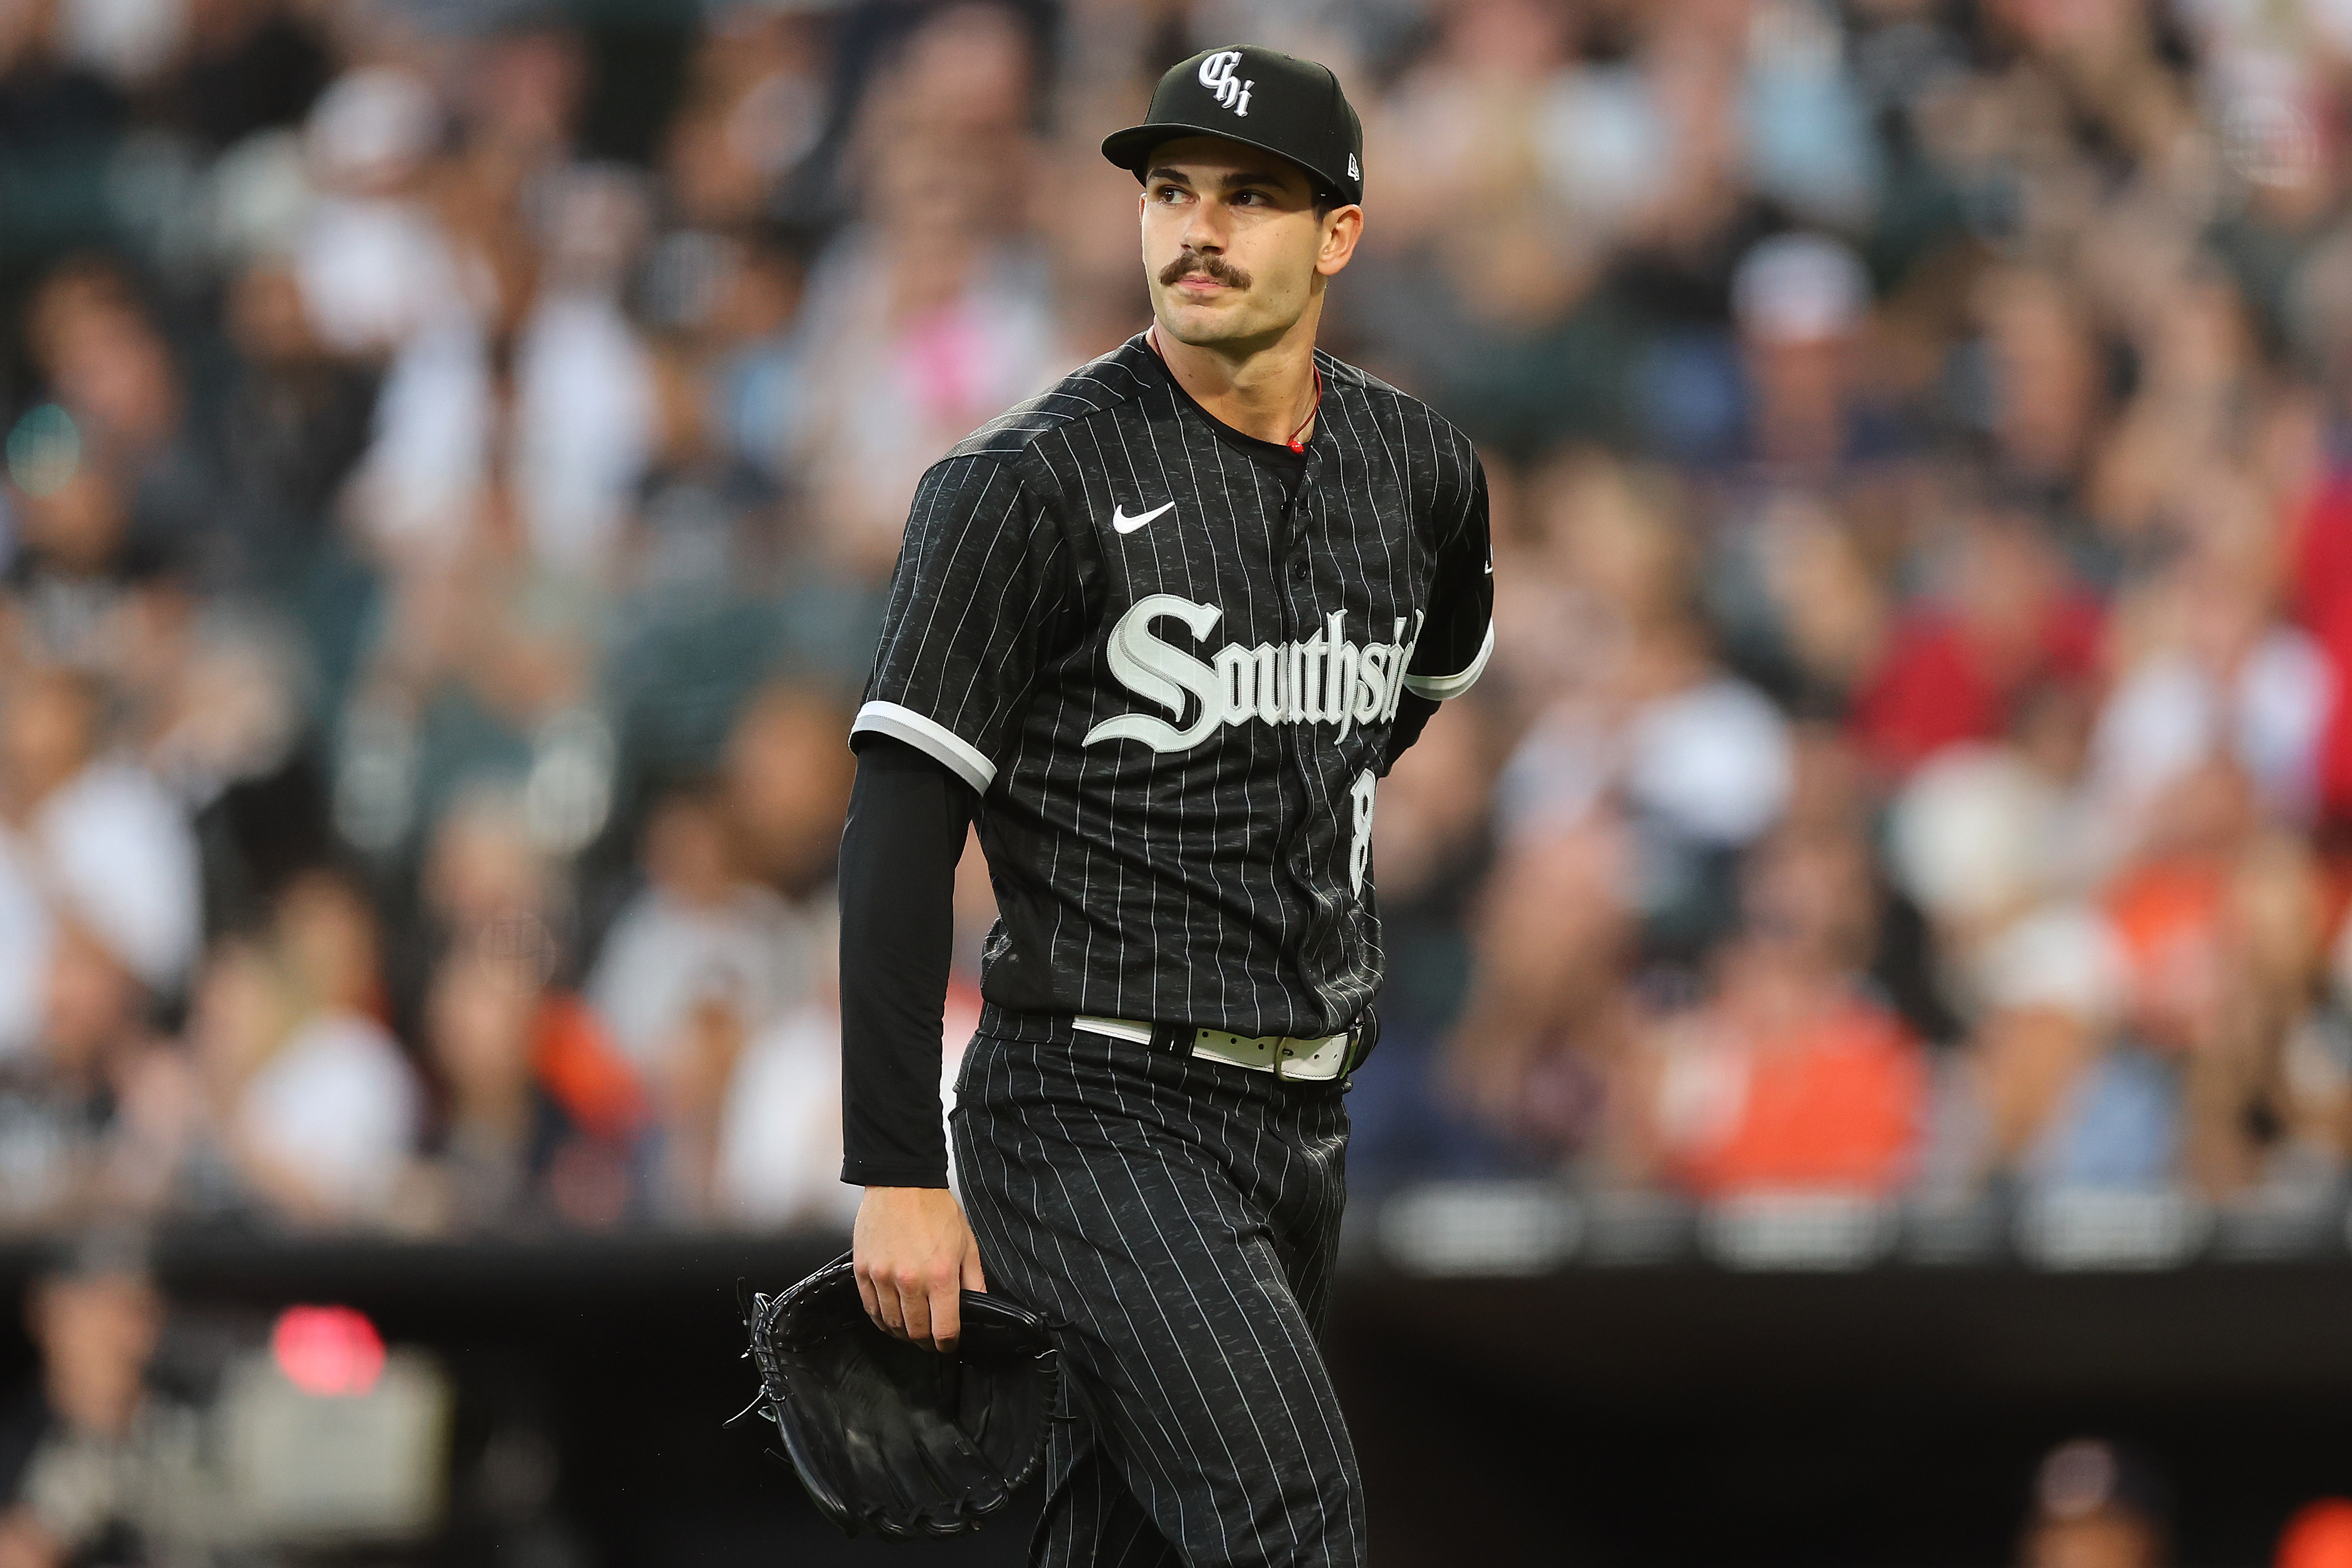 Aaron Bummer of the Chicago White Sox reacts after the double play